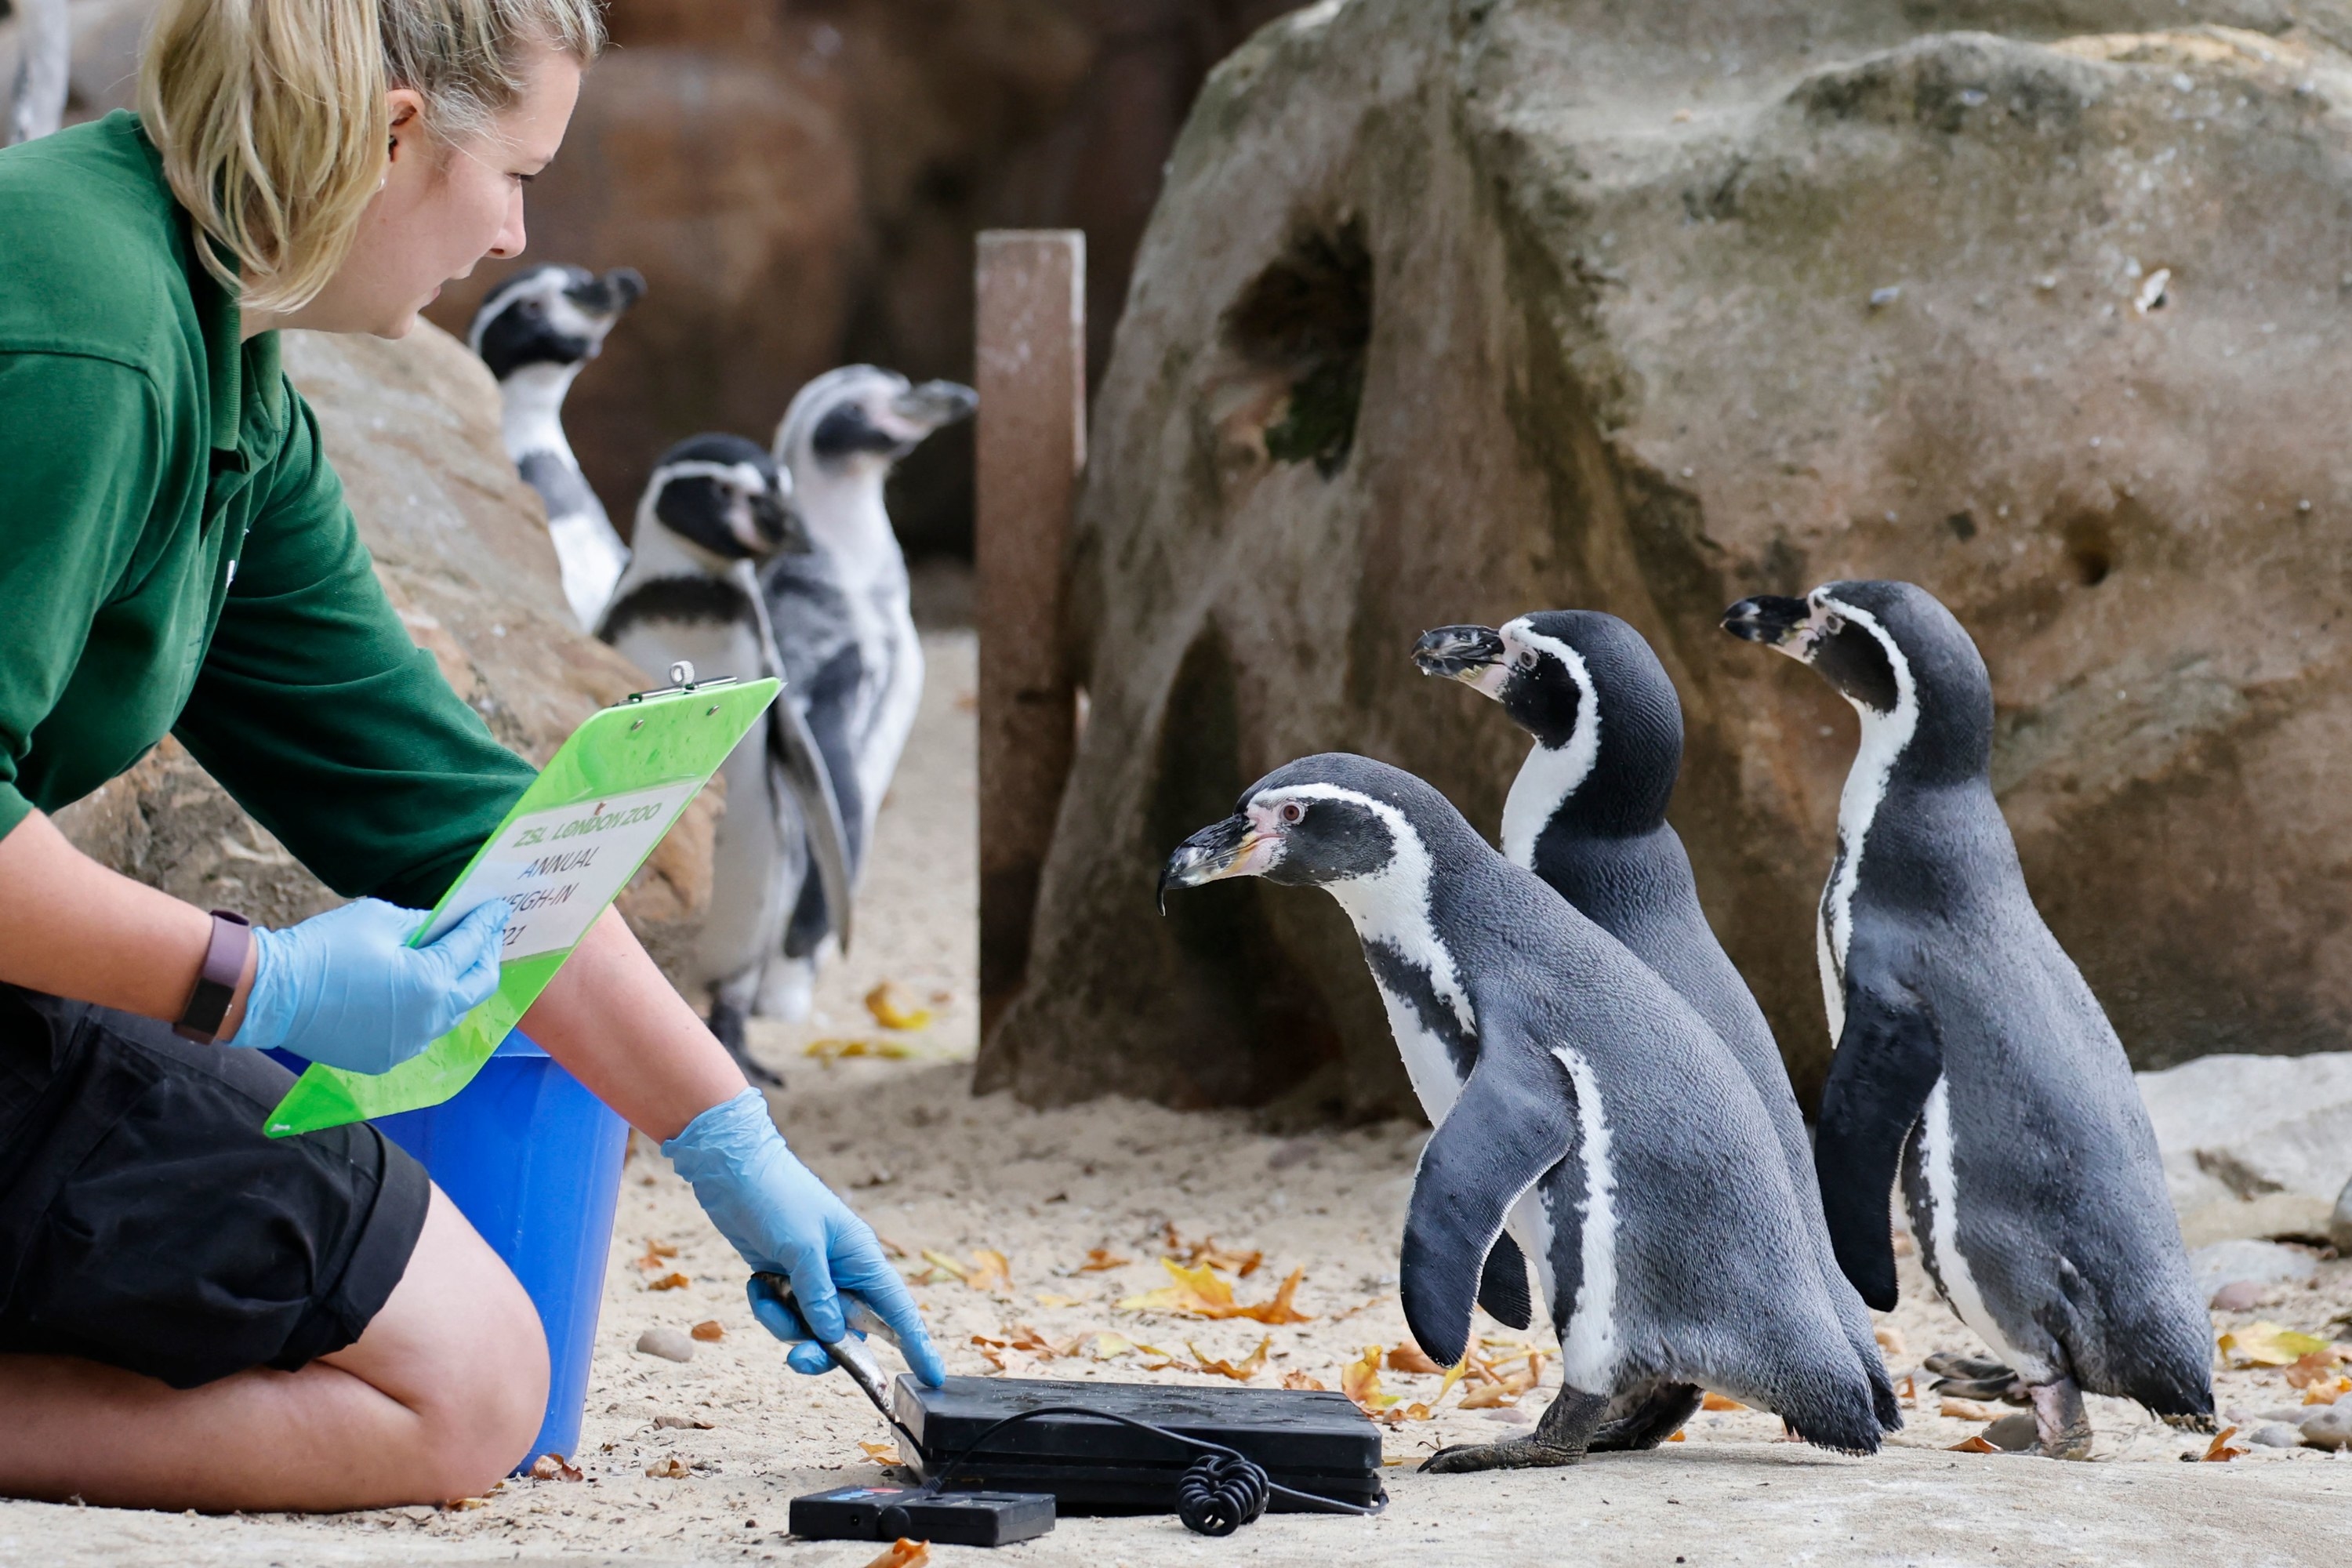 Zookeeper working with penguins